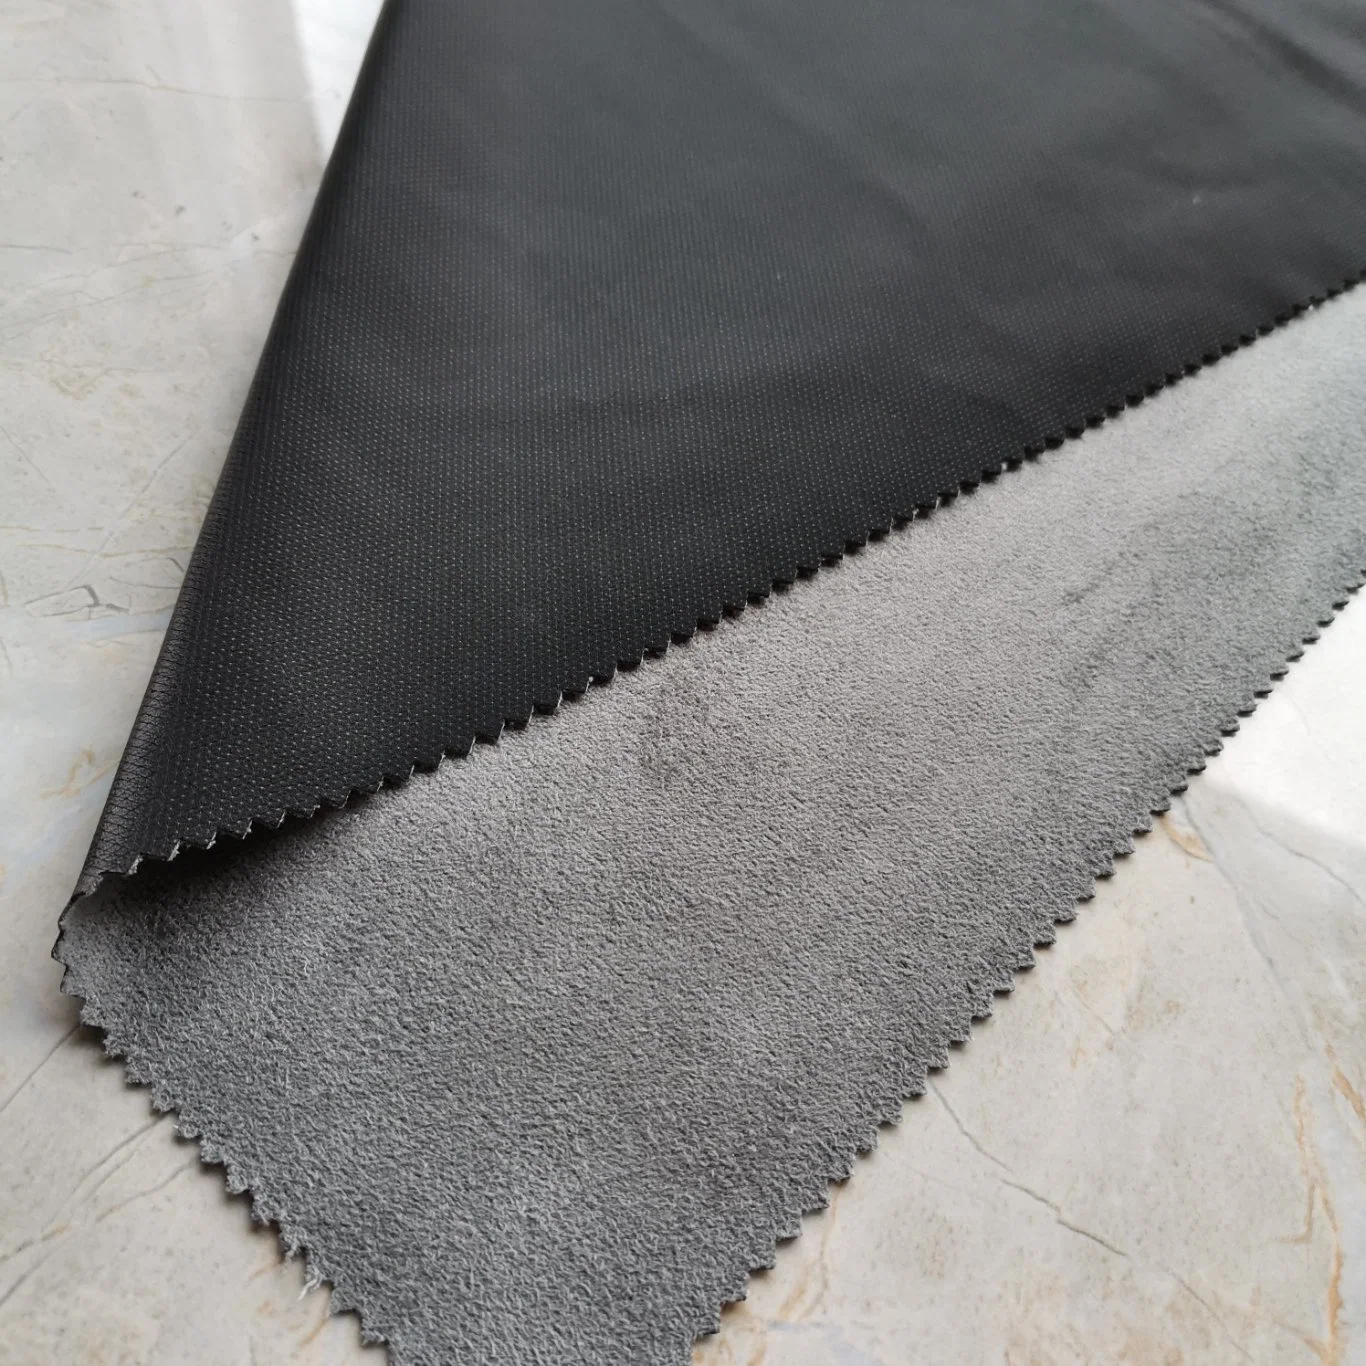 Silk Shining PU Leather with Suede Backing and Super Soft Hand-Feel